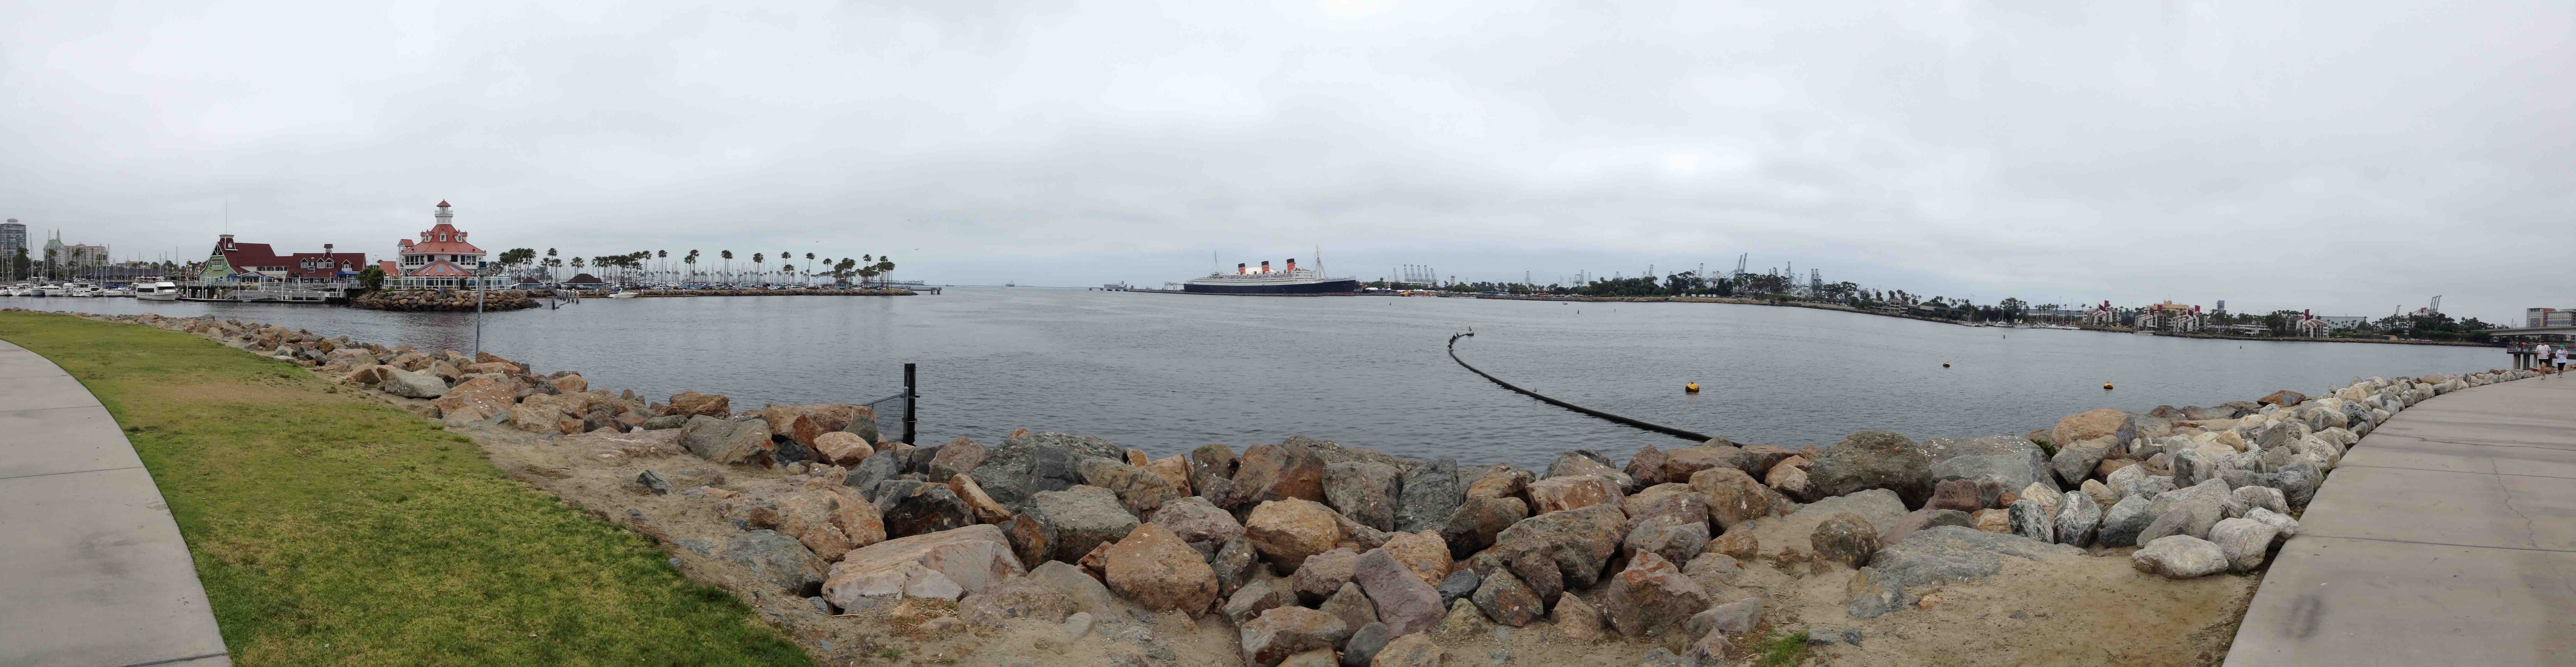 Panoramic photo of Long Beach harbor with the Queen Mary in the background